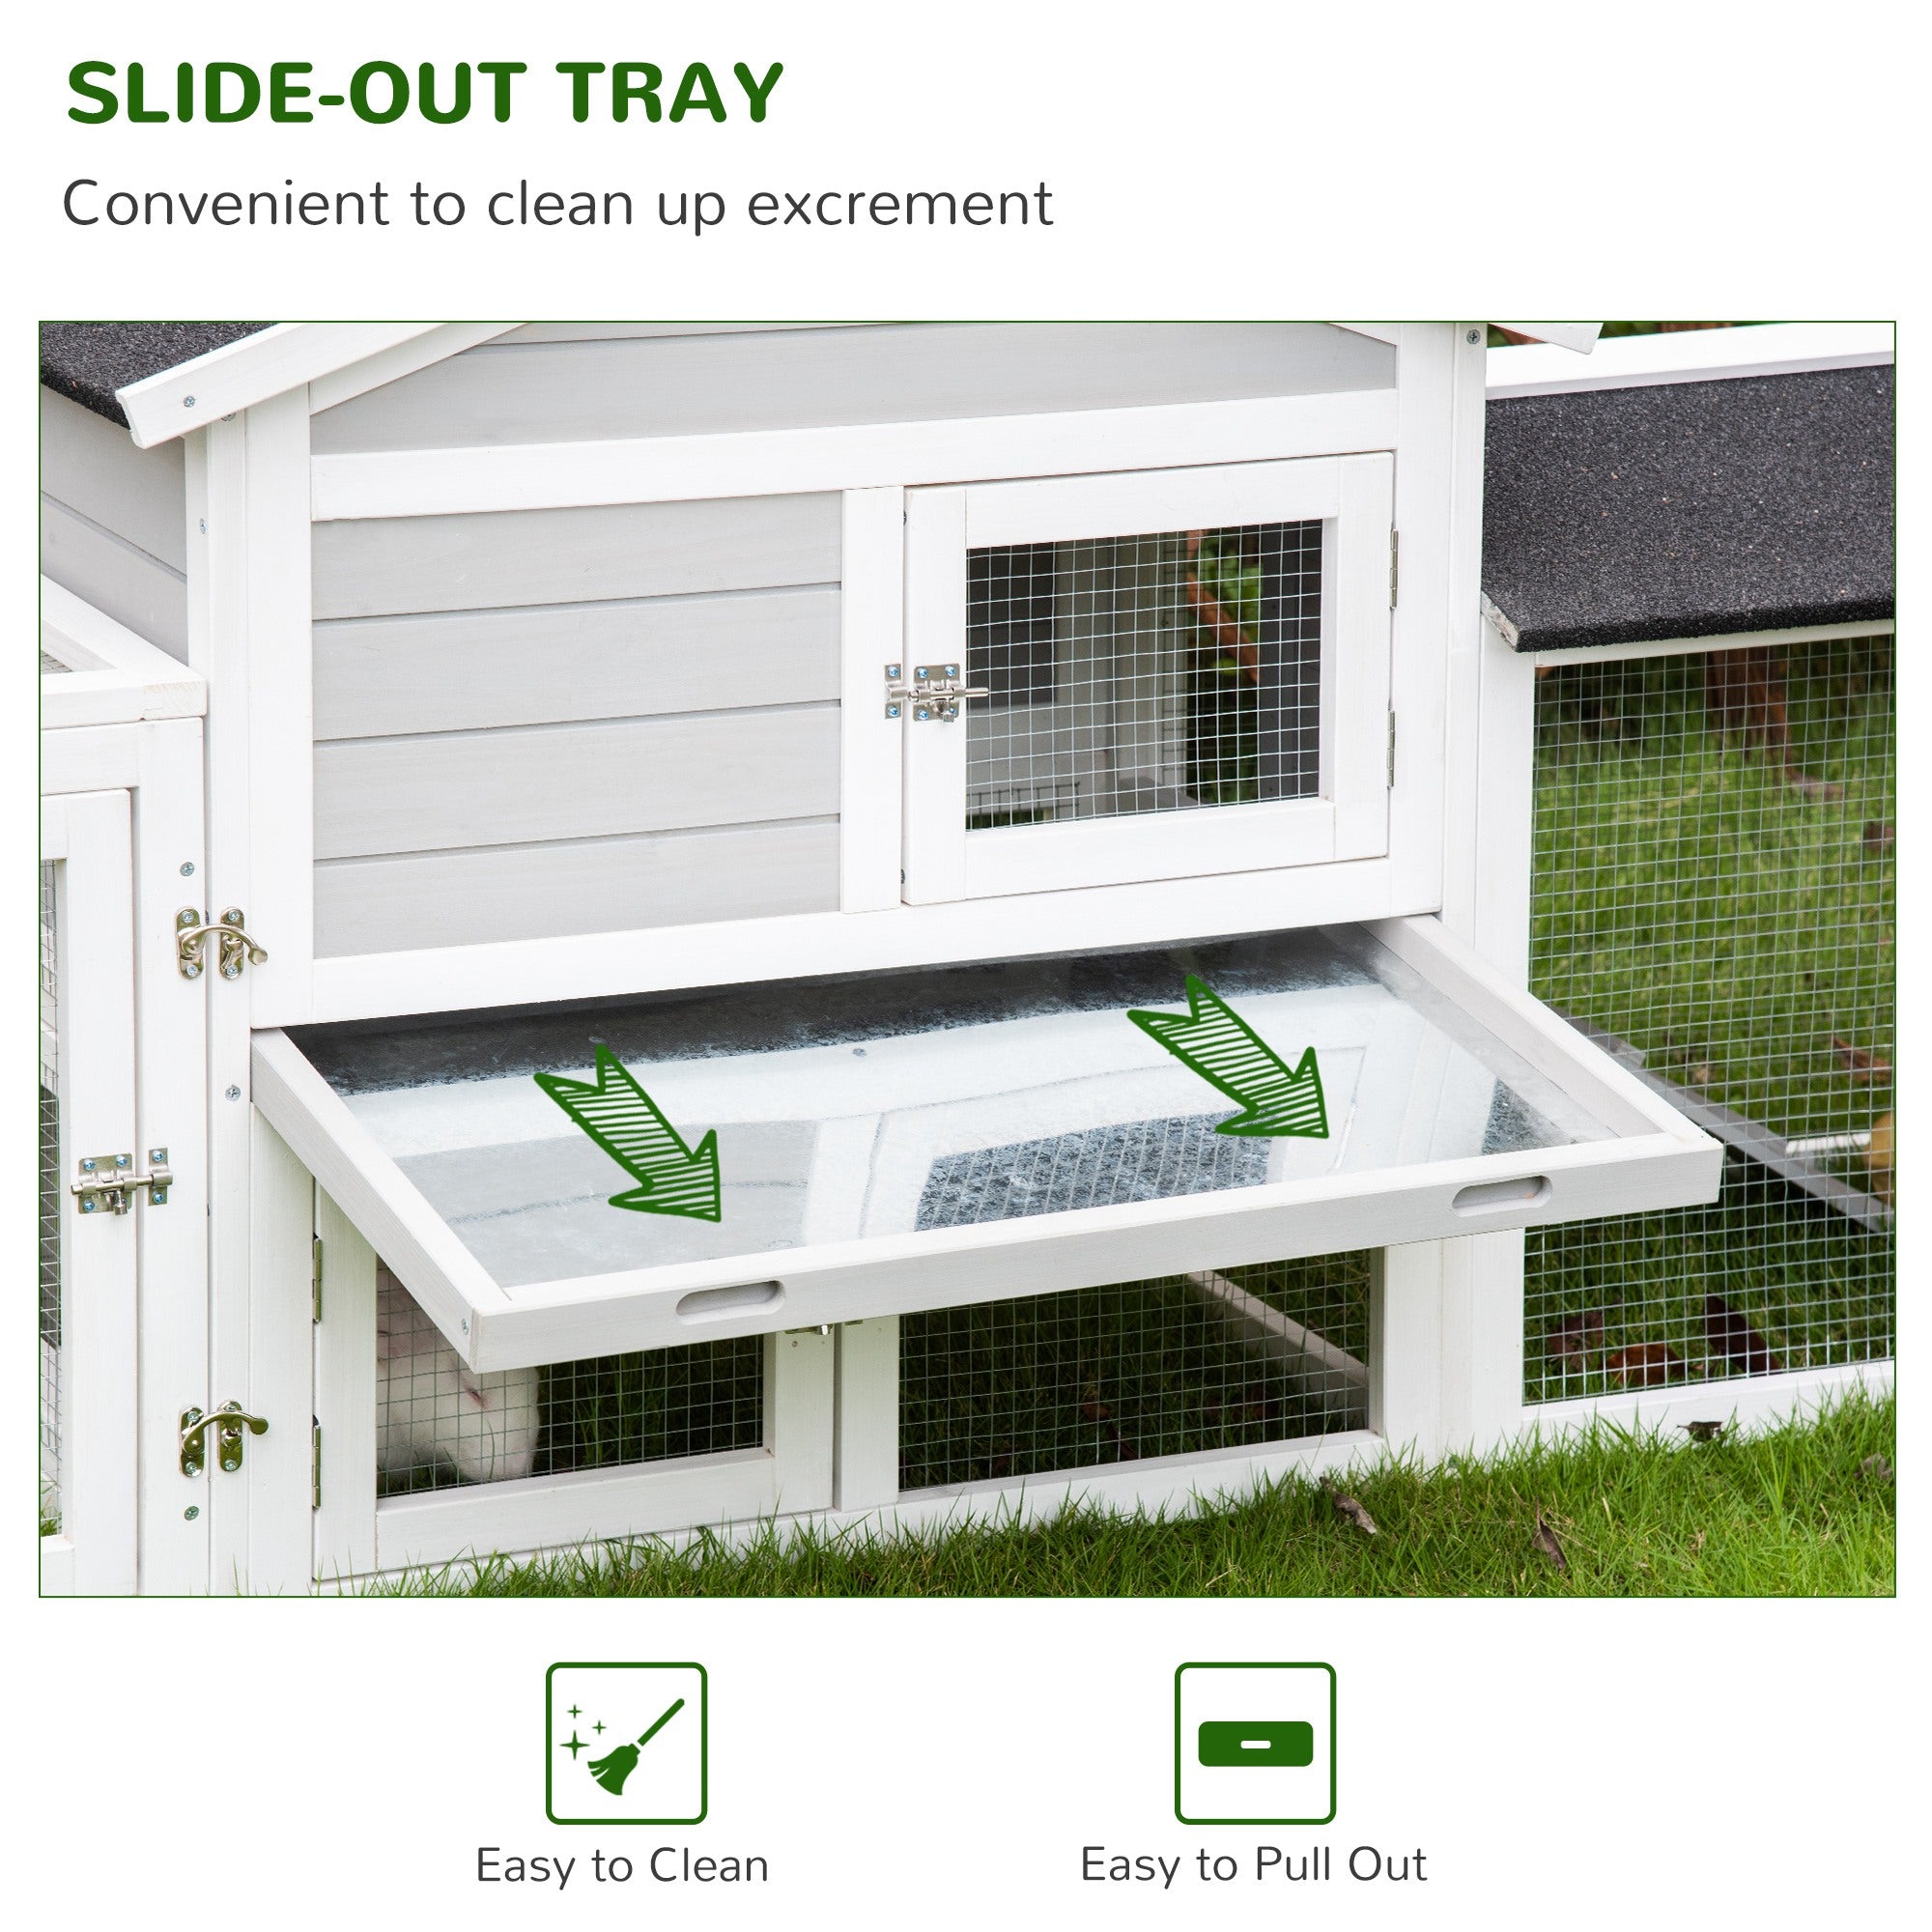 PawHut 2 Tier Wooden Rabbit Hutch Small Pet House Bunny Run Cage with Pull Out Tray Ramps Lockable Doors Large Run Area Asphalt Roof for Outdoor Grey - Inspirely